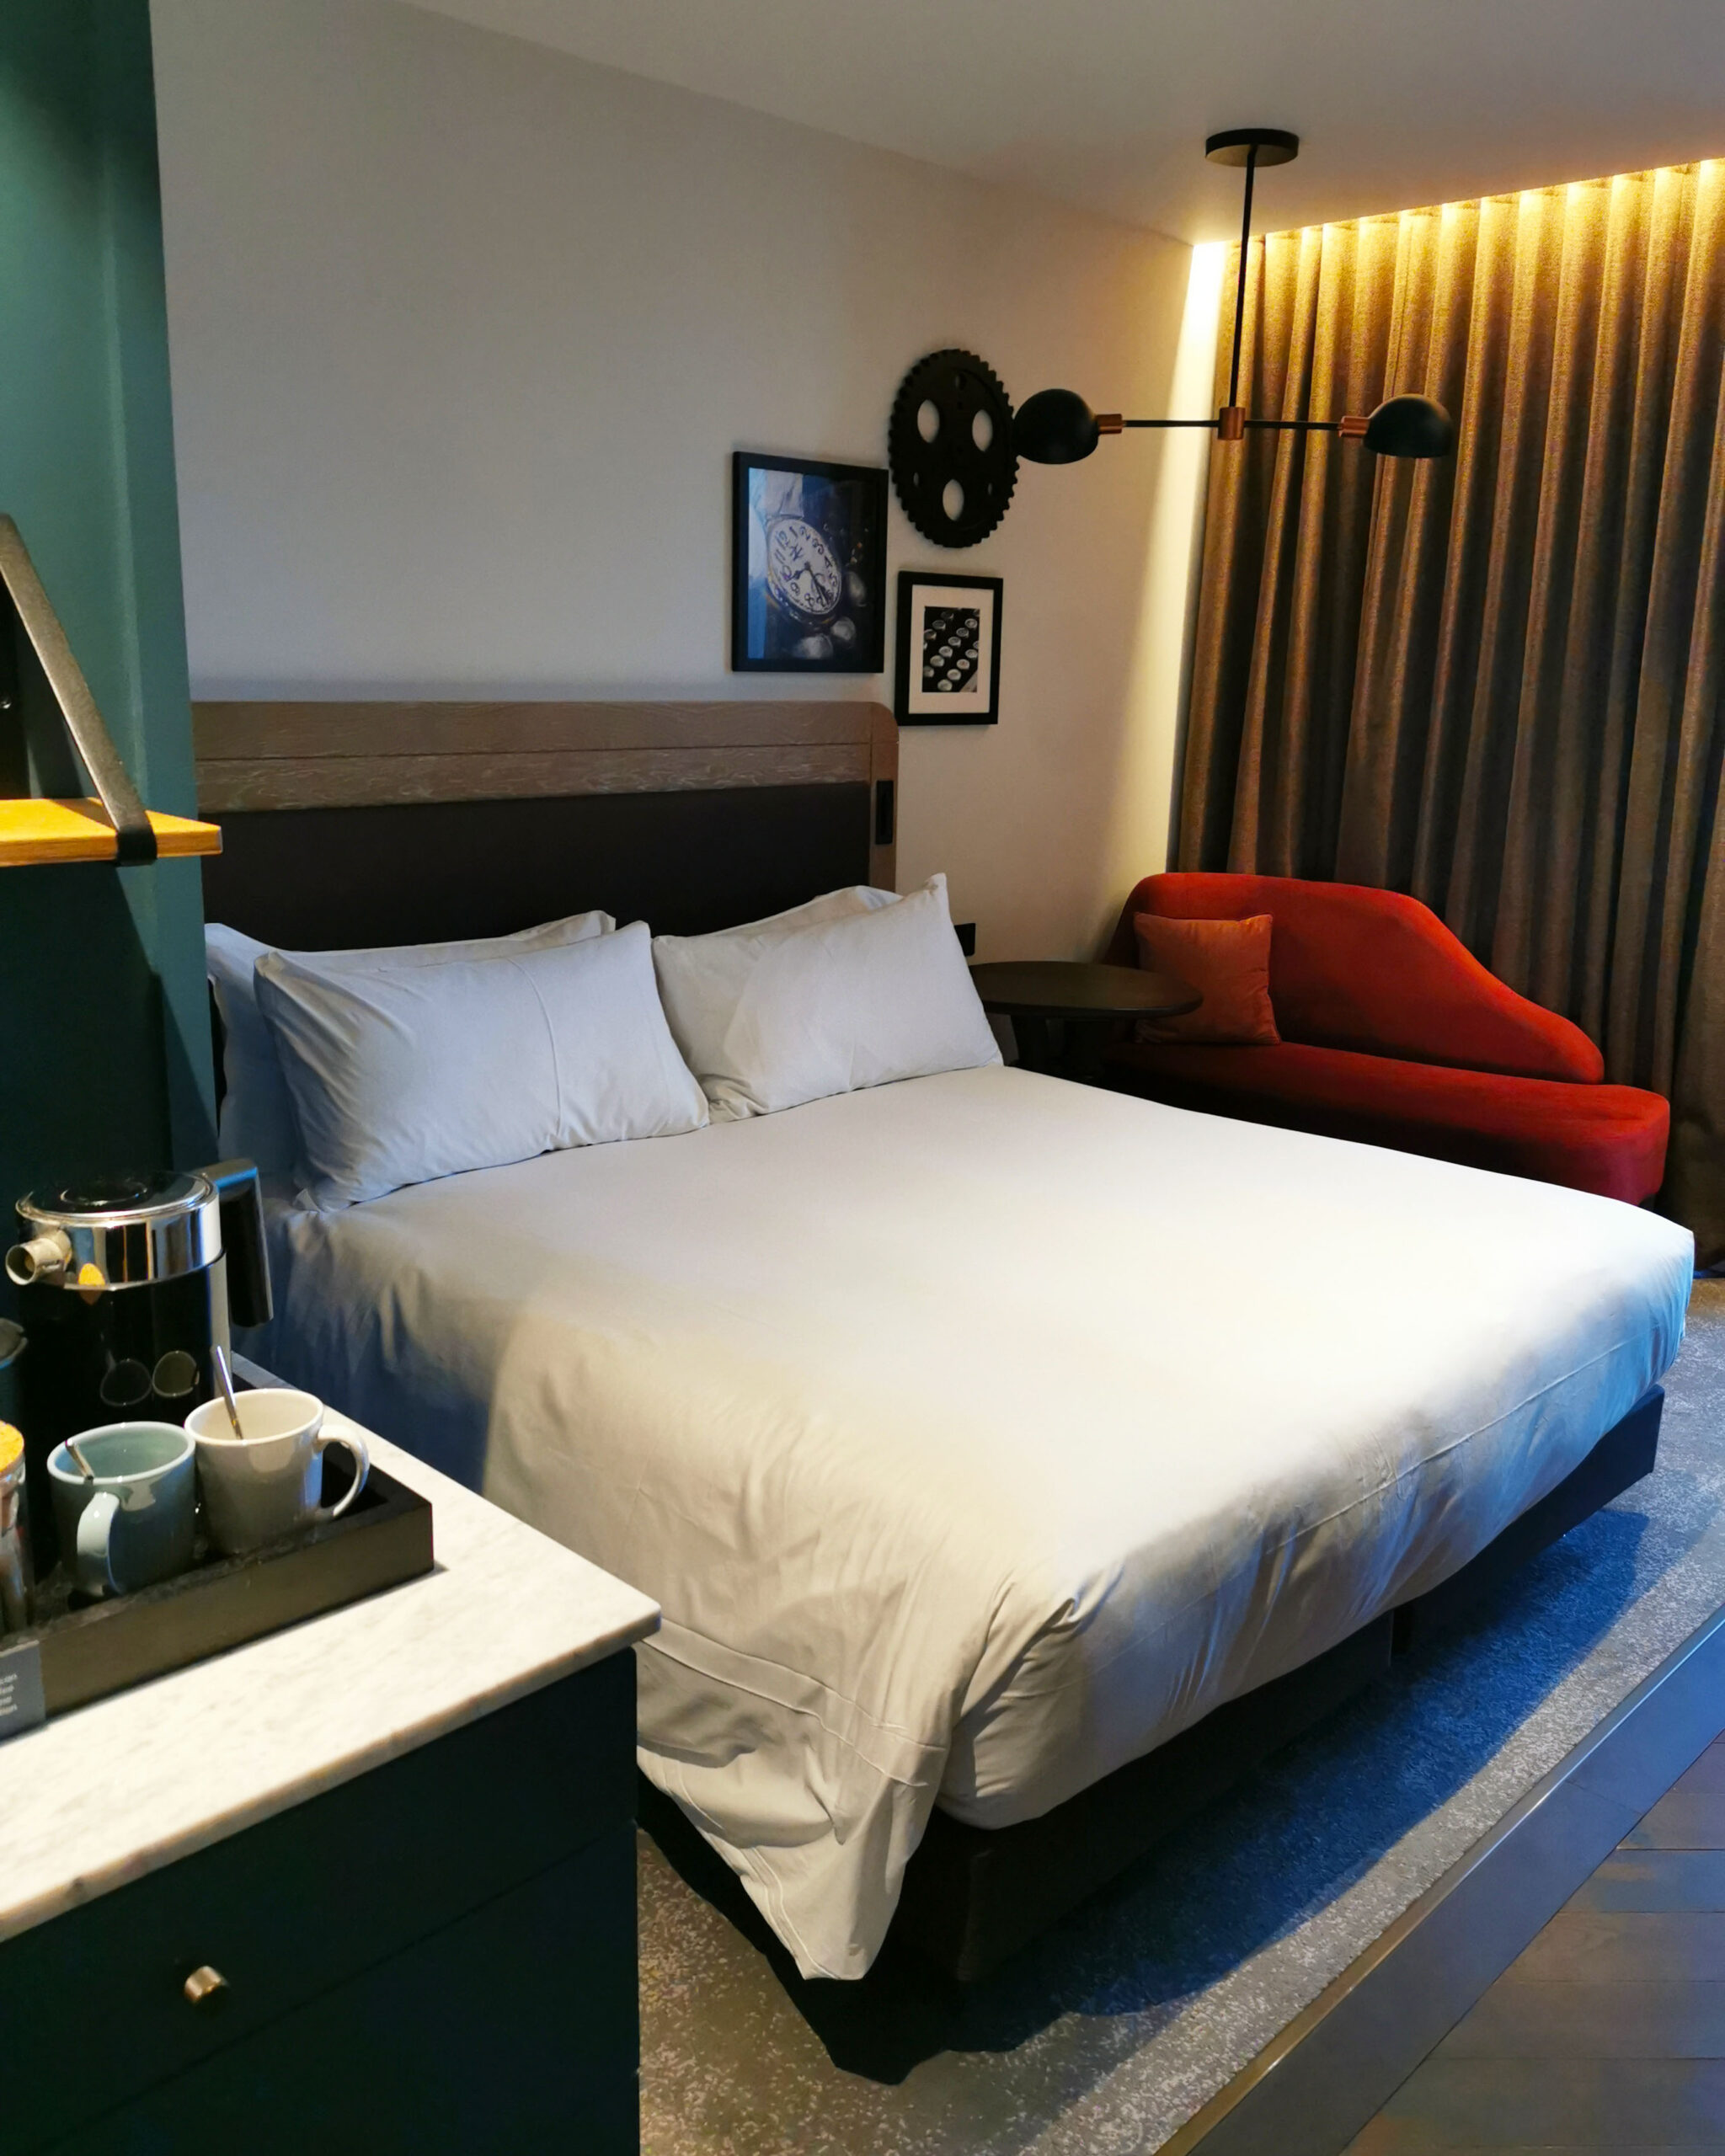 The Gantry London, Stratford, London, London Date, London Hotel, Hotel Review, London Weekend, the Gantry, Hilton Curio Collection, the Frenchie Mummy